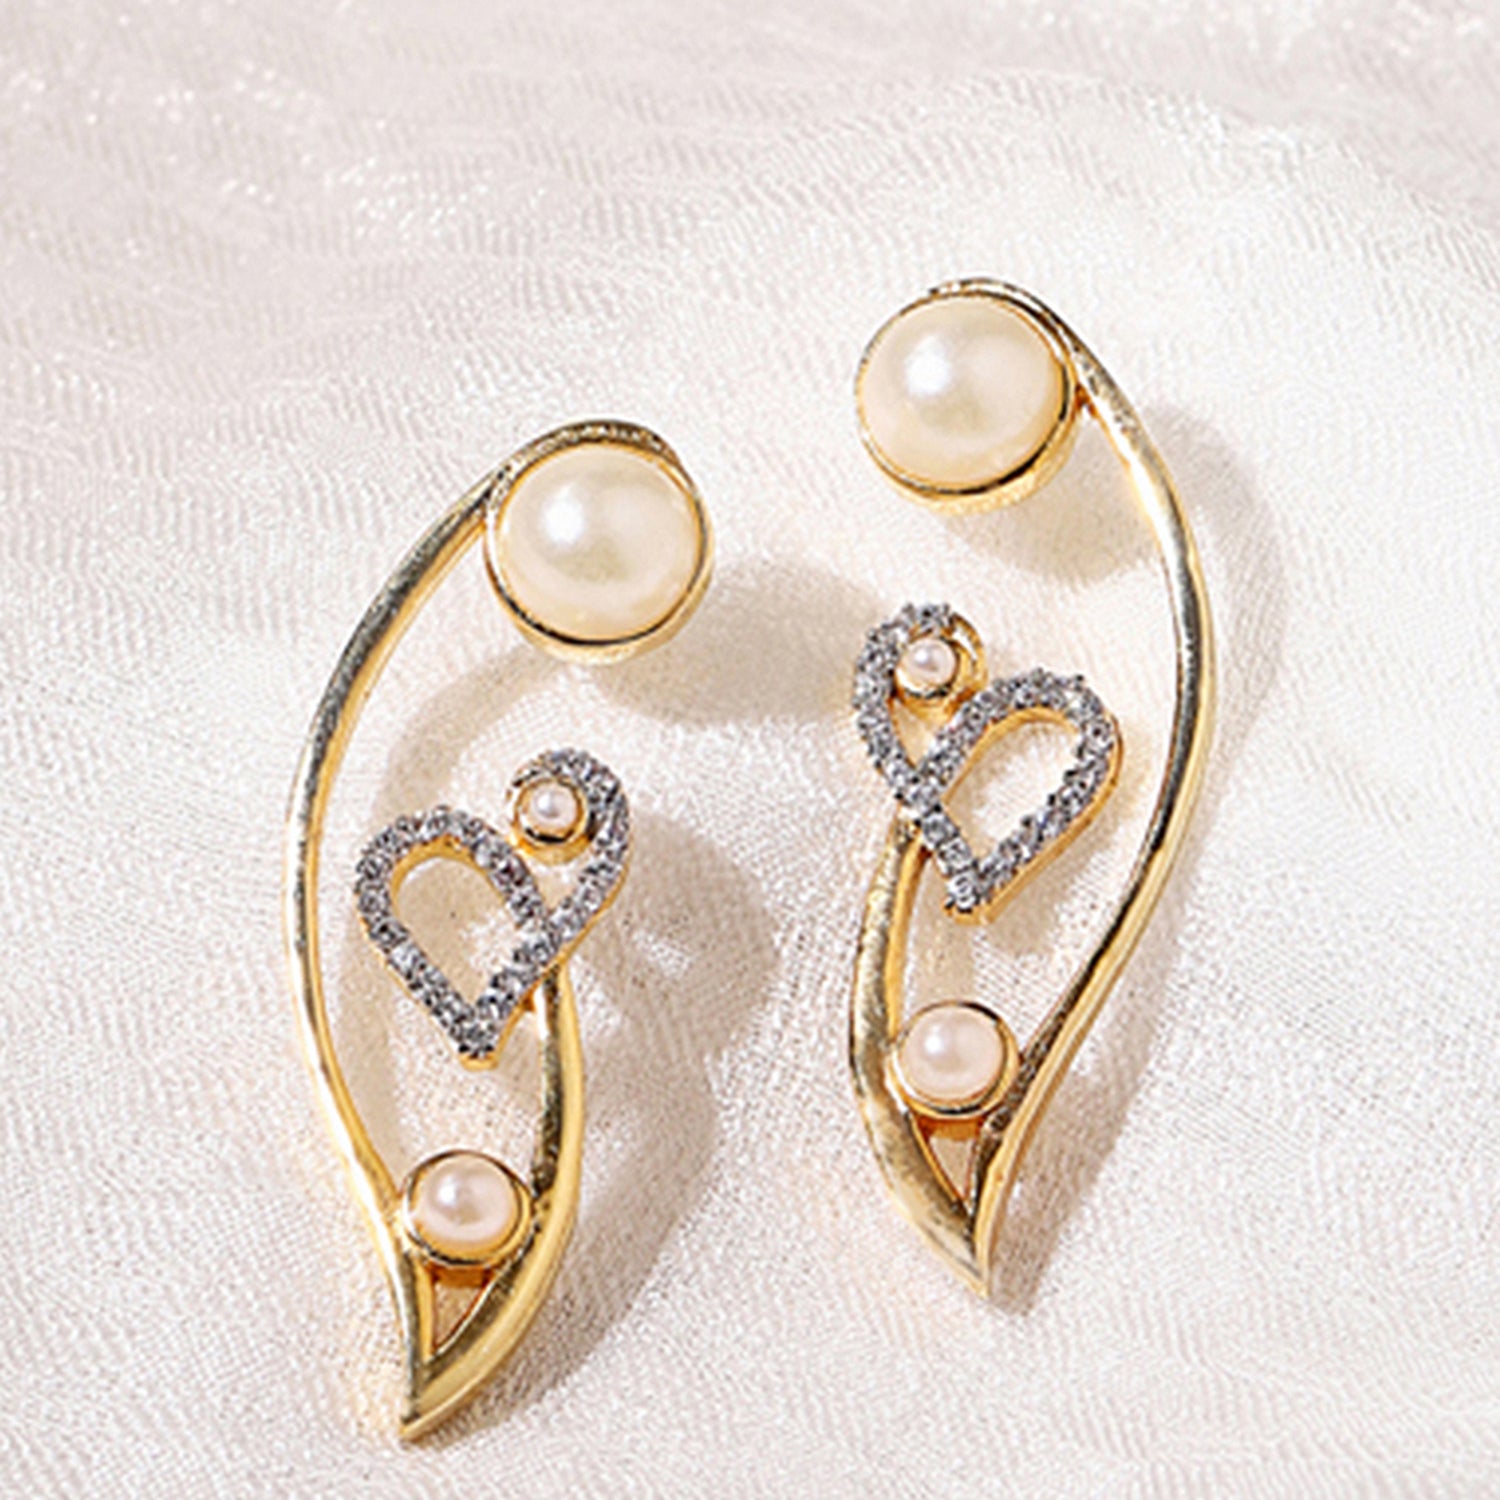 Buy/Send Voylla Gold Plated Floral Earrings Online- FNP